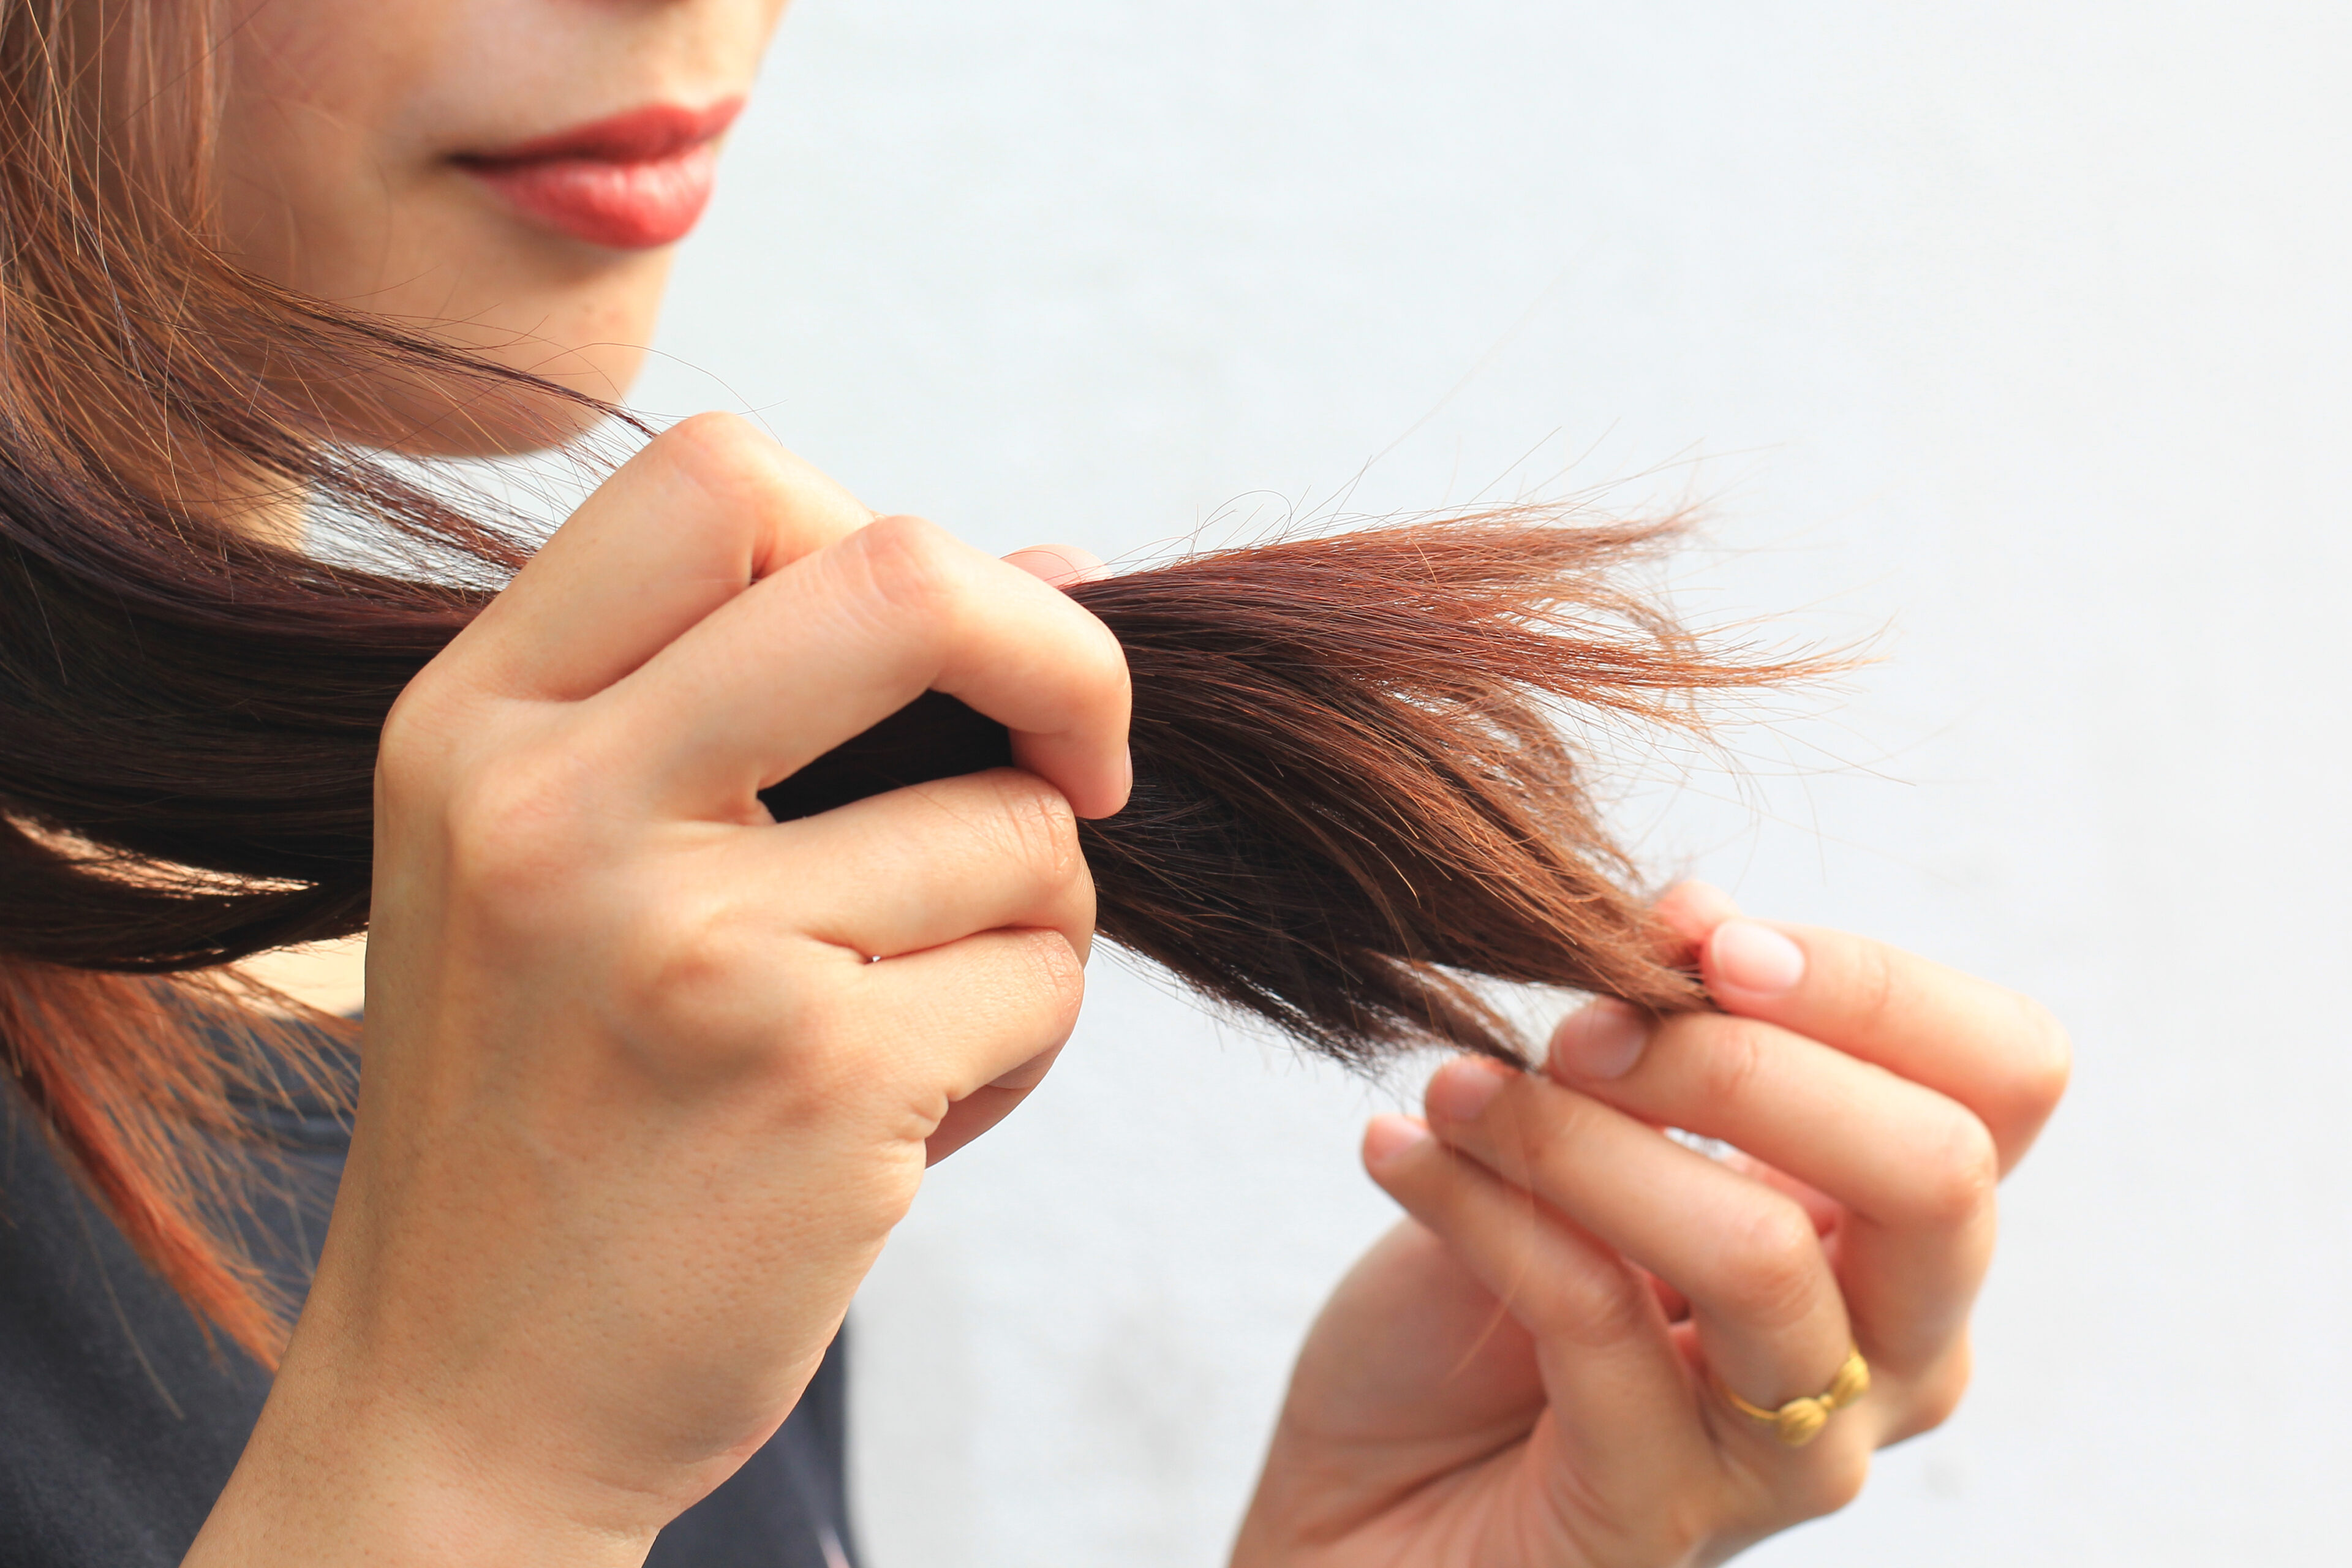 Common problems about split ends, damage, and hair loss